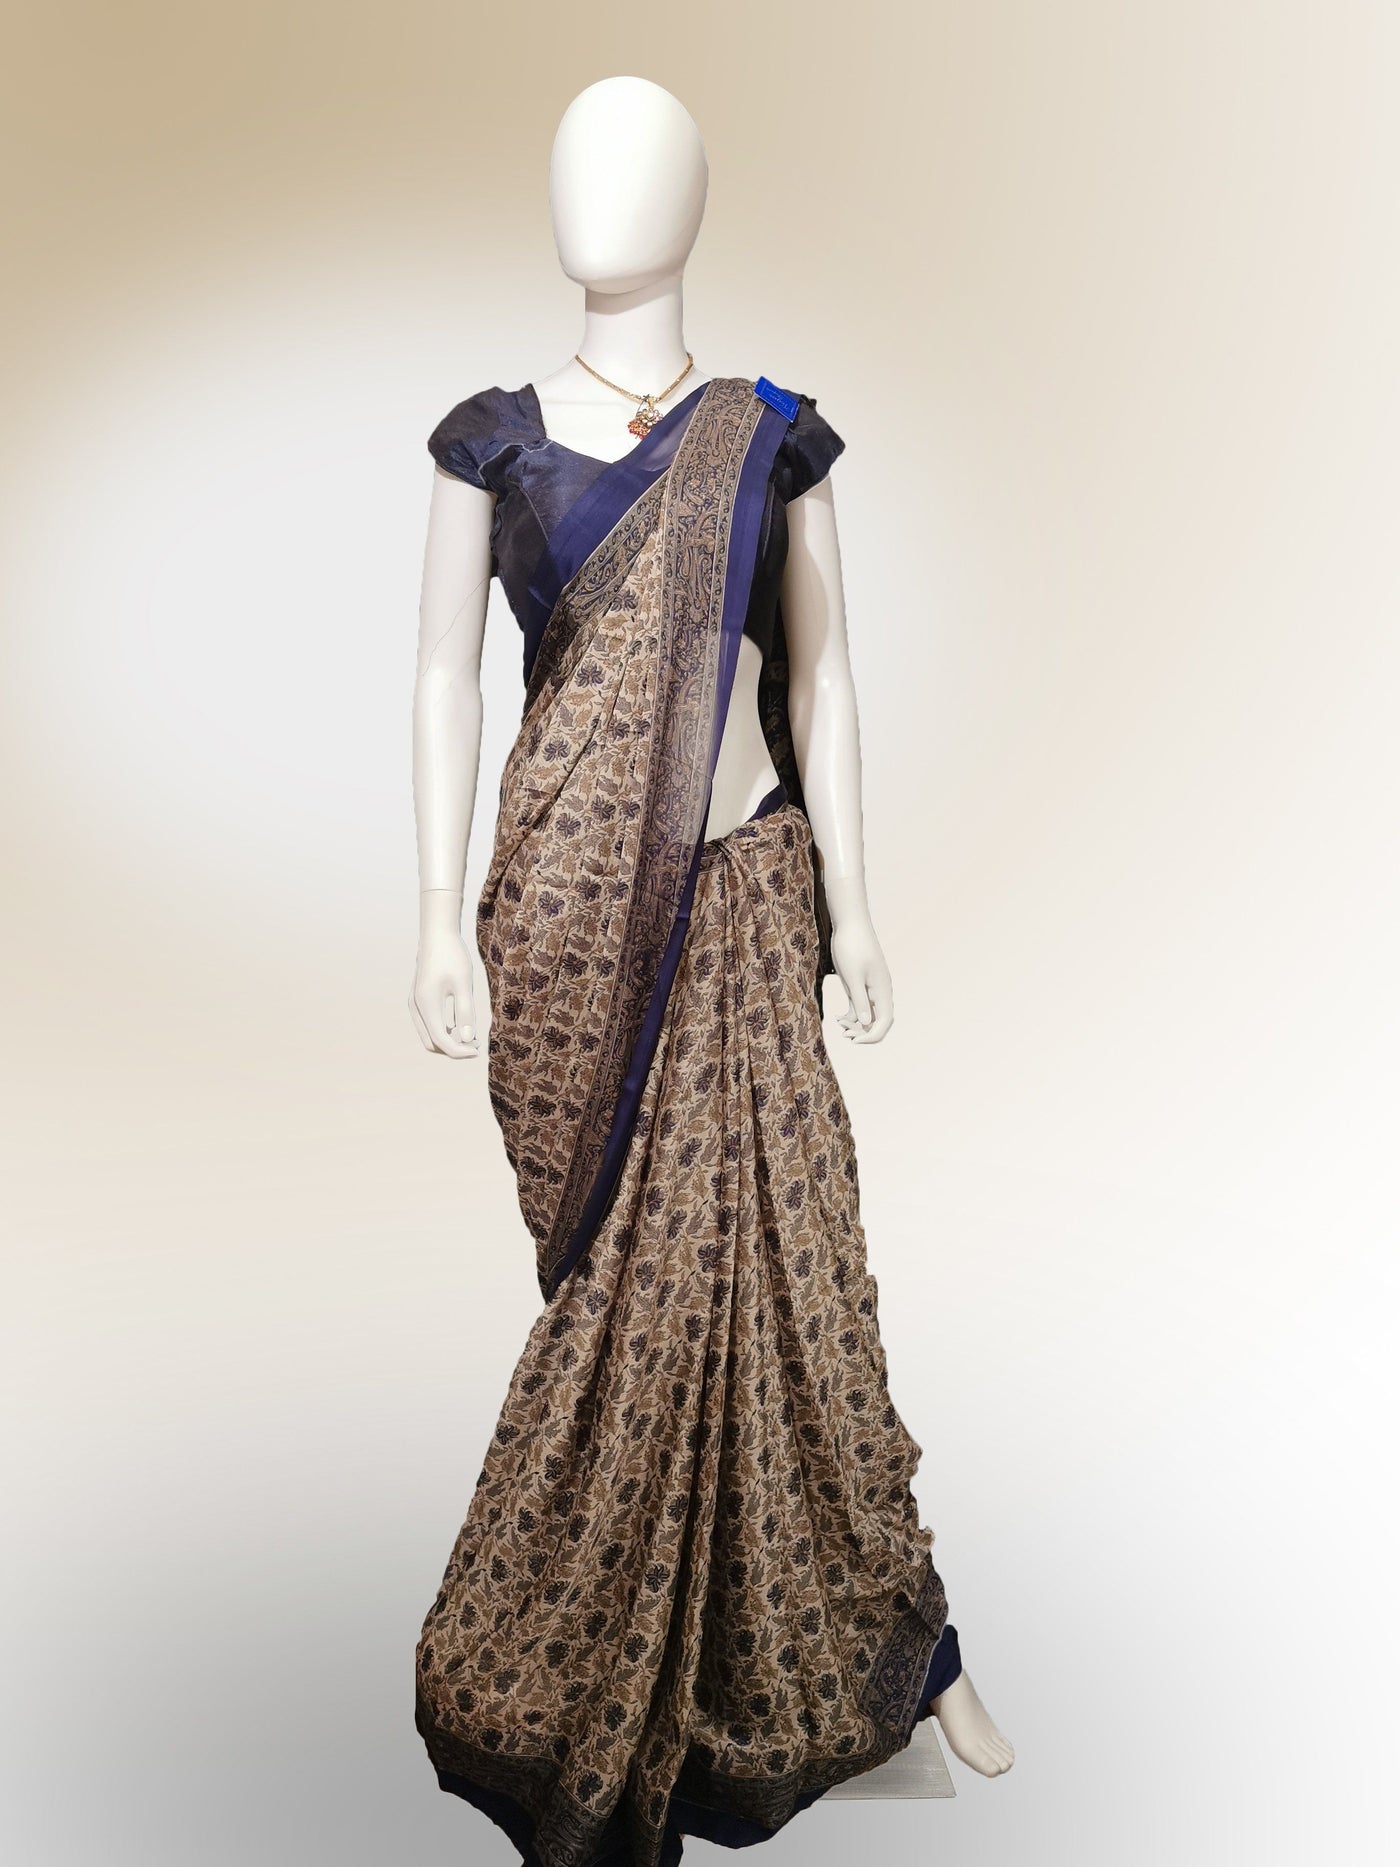 Saree in Bronze and Blue Print - Indian Clothing in Denver, CO, Aurora, CO, Boulder, CO, Fort Collins, CO, Colorado Springs, CO, Parker, CO, Highlands Ranch, CO, Cherry Creek, CO, Centennial, CO, and Longmont, CO. Nationwide shipping USA - India Fashion X